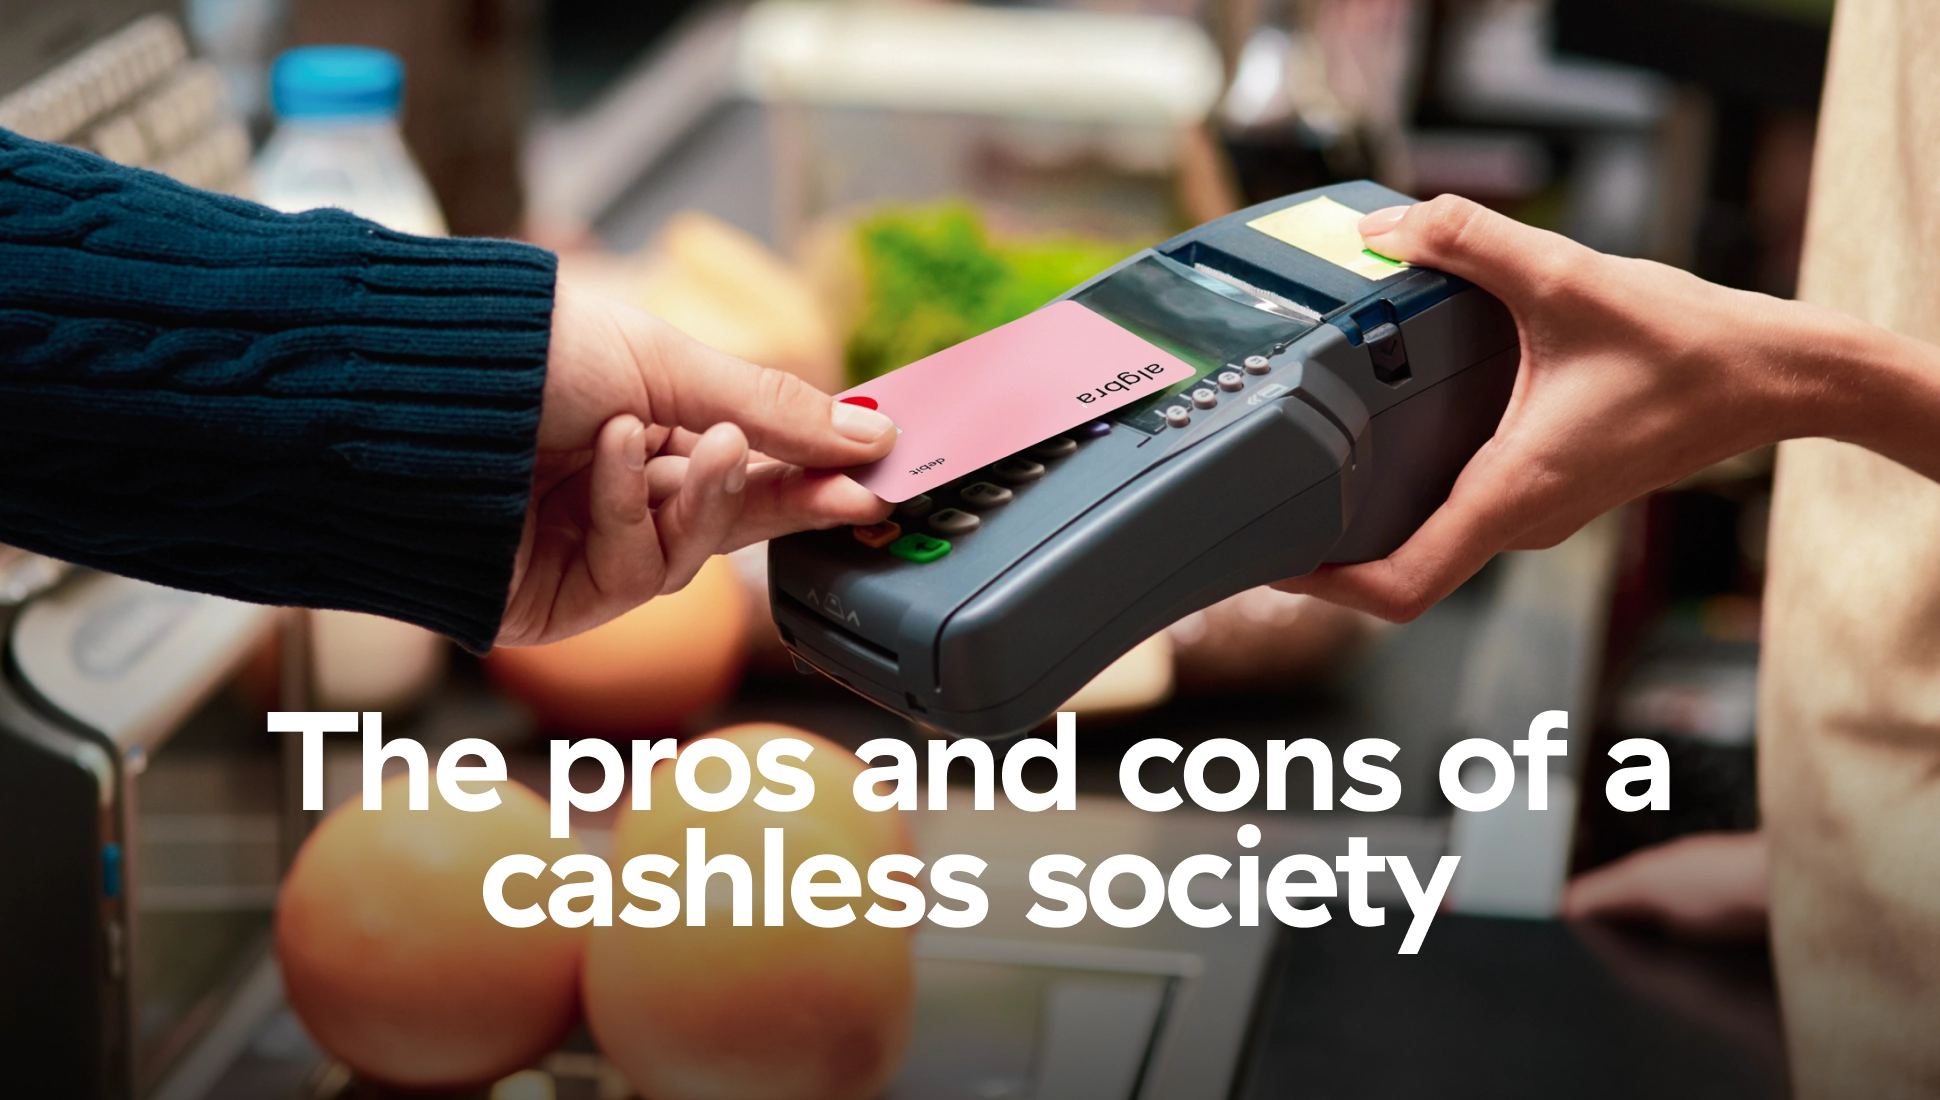 The pros and cons of a cashless society